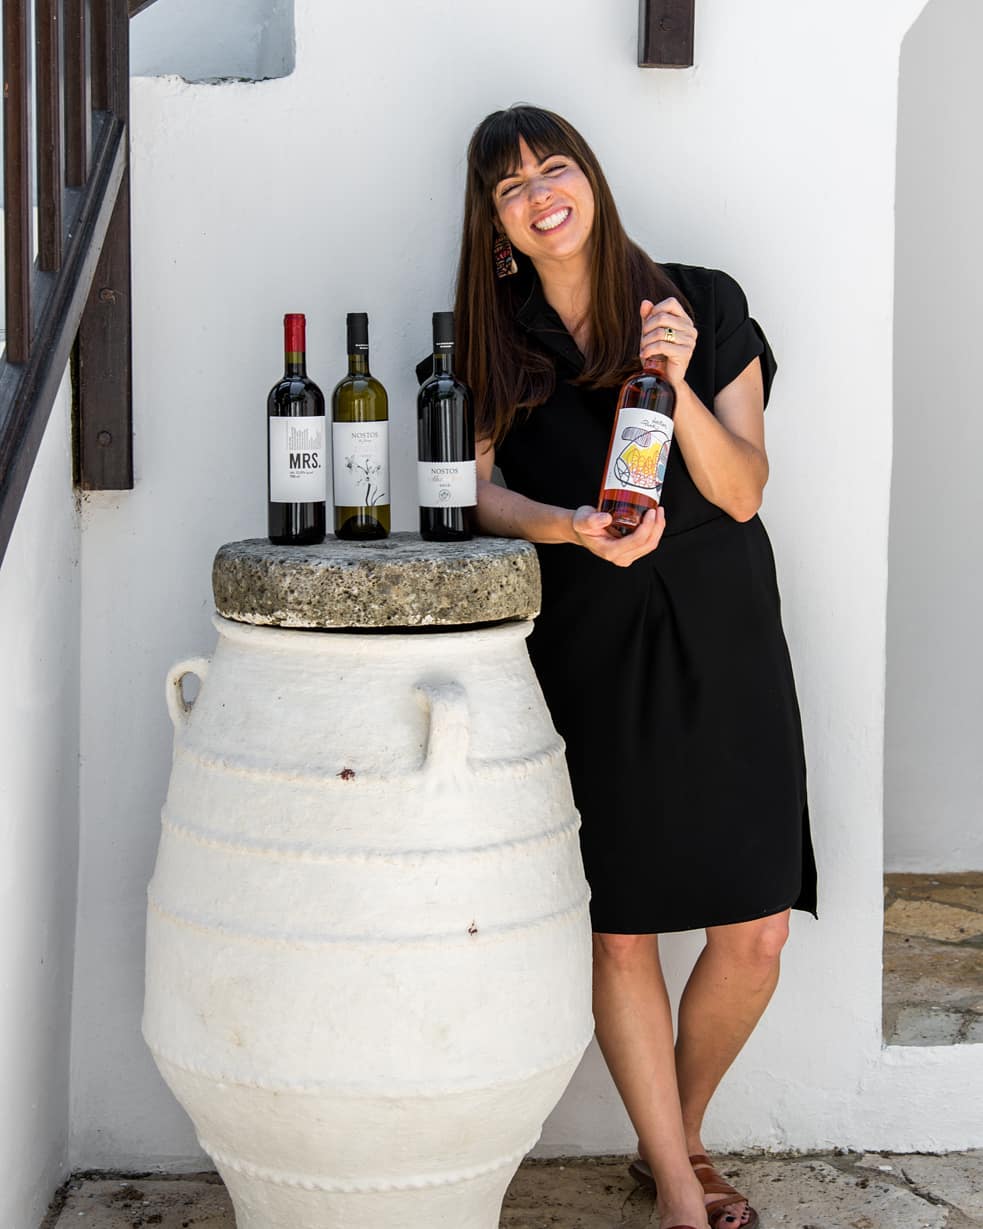 Insights Greece - Organic Boutique Winery Set in a Serene Village in Chania